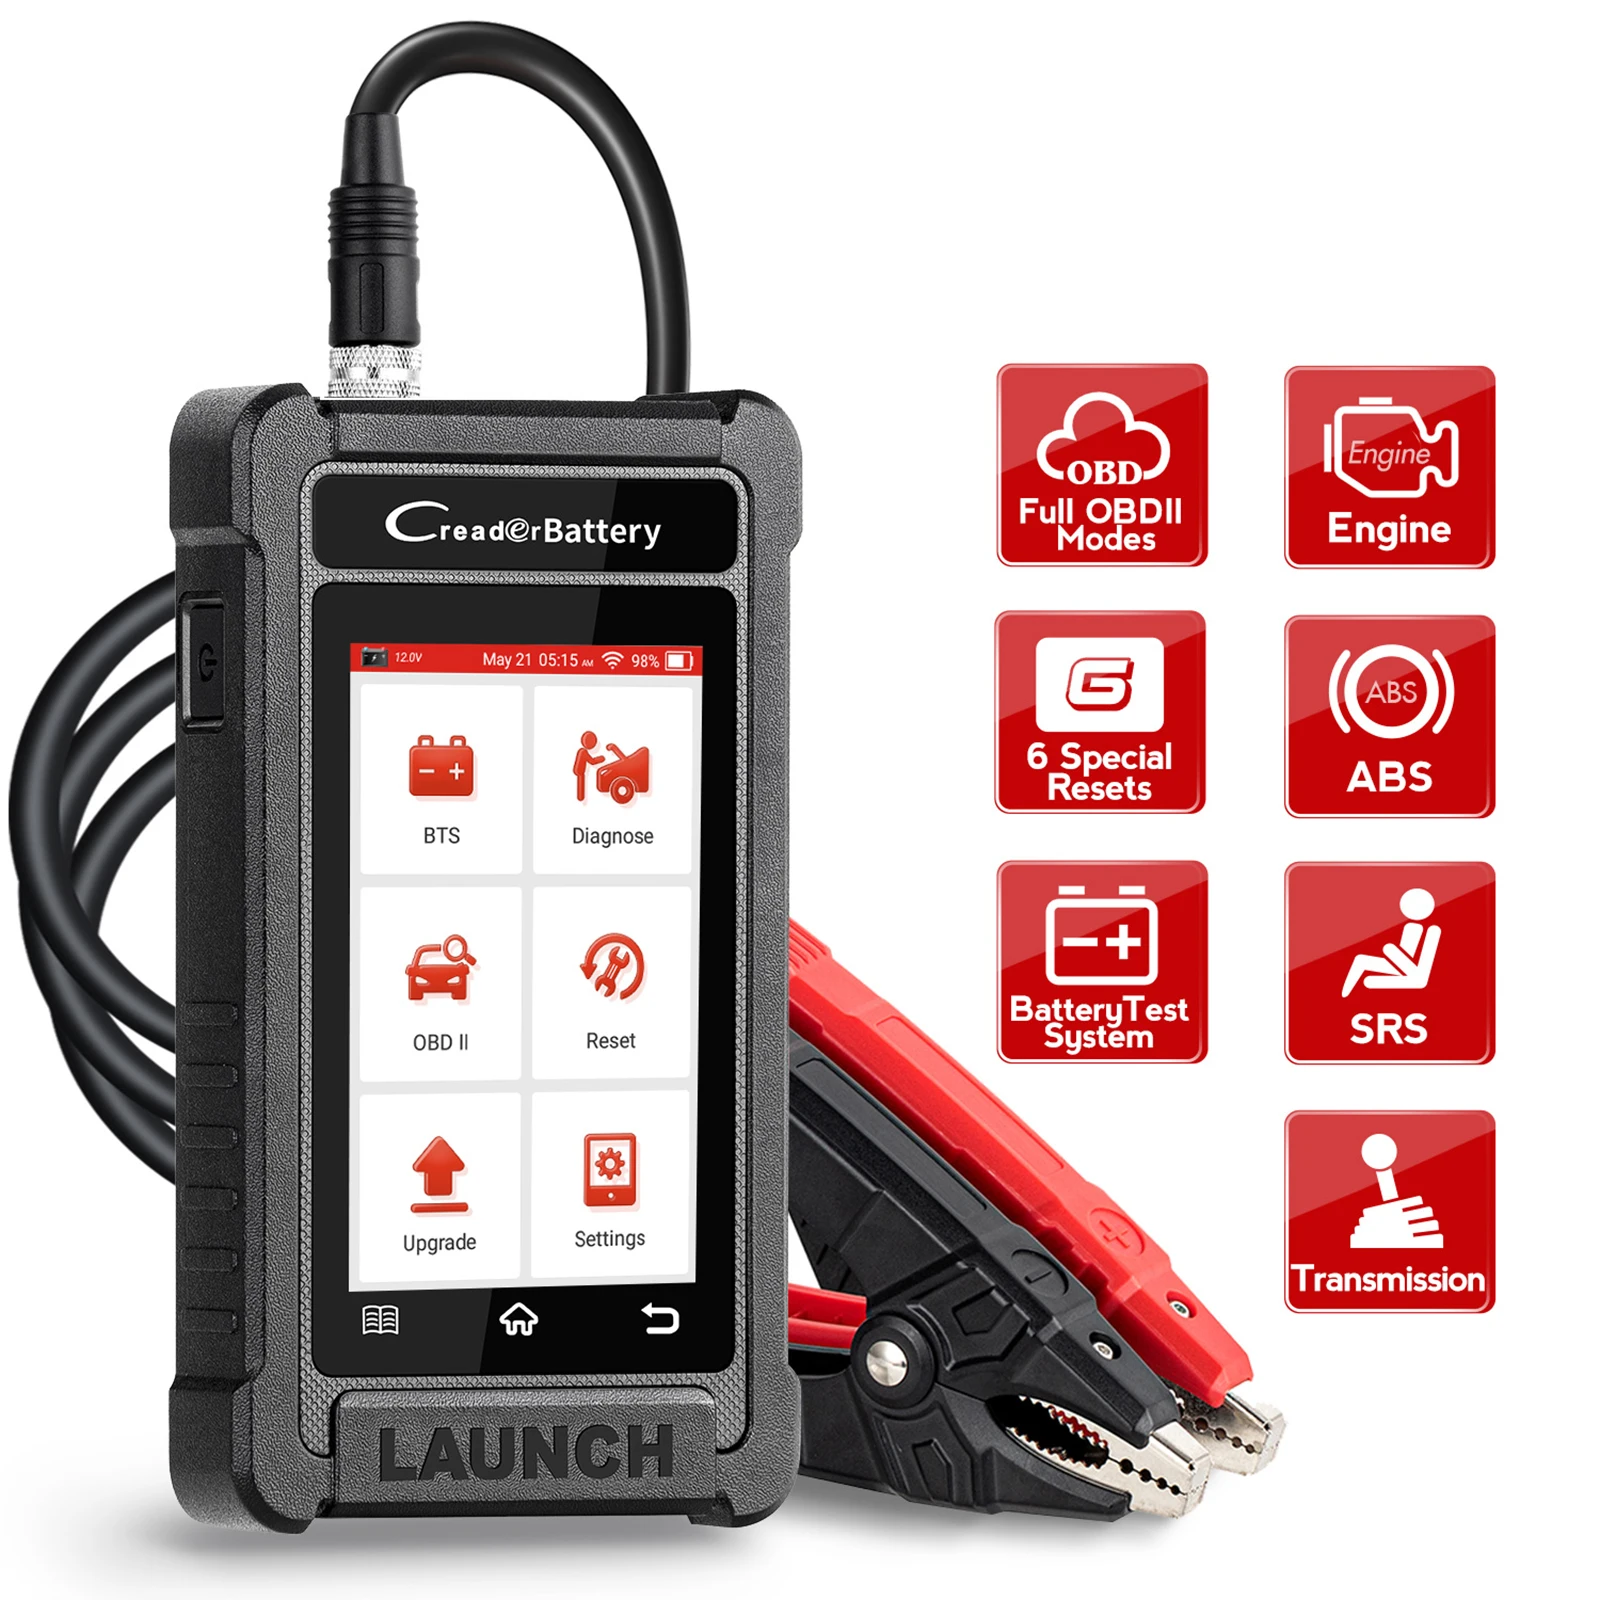 

LAUNCH X431 CRB5001 OBD2 Diagnostic Tools 12V Car Battery Tester Auto ENG ABS SRS AT OIL BMS TPMS 6 Reset Free Update pk BST360